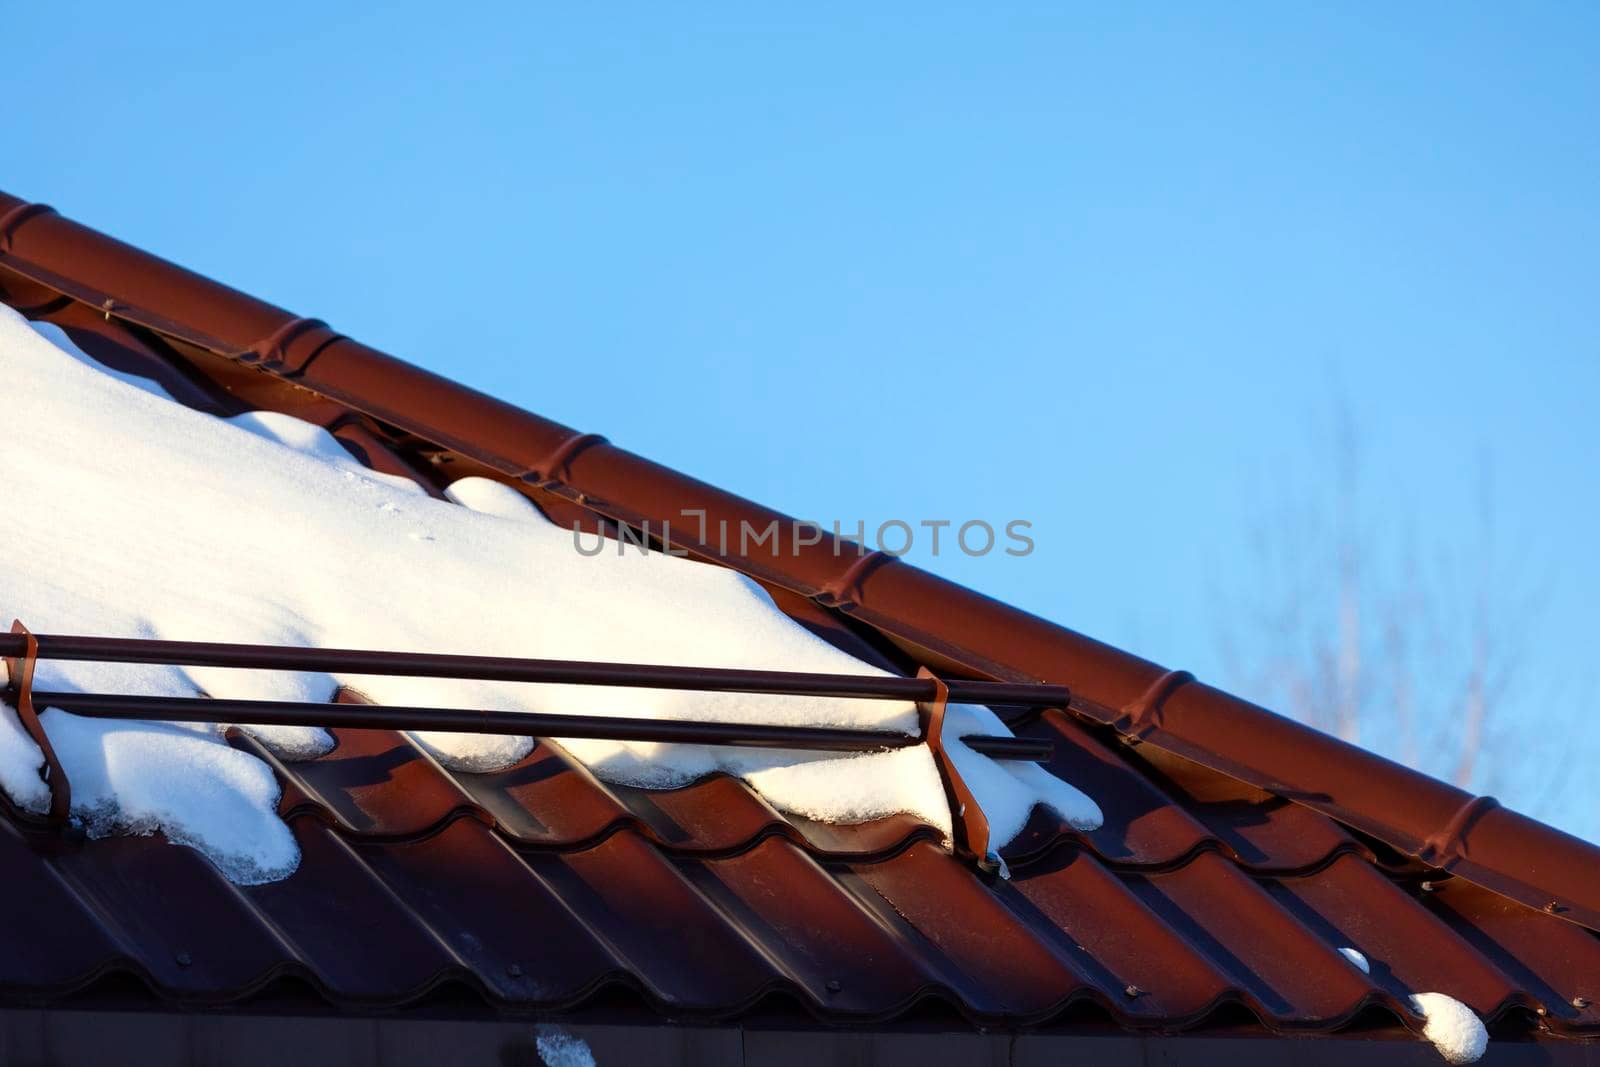 Melting snow on the metal roof and blue sky above